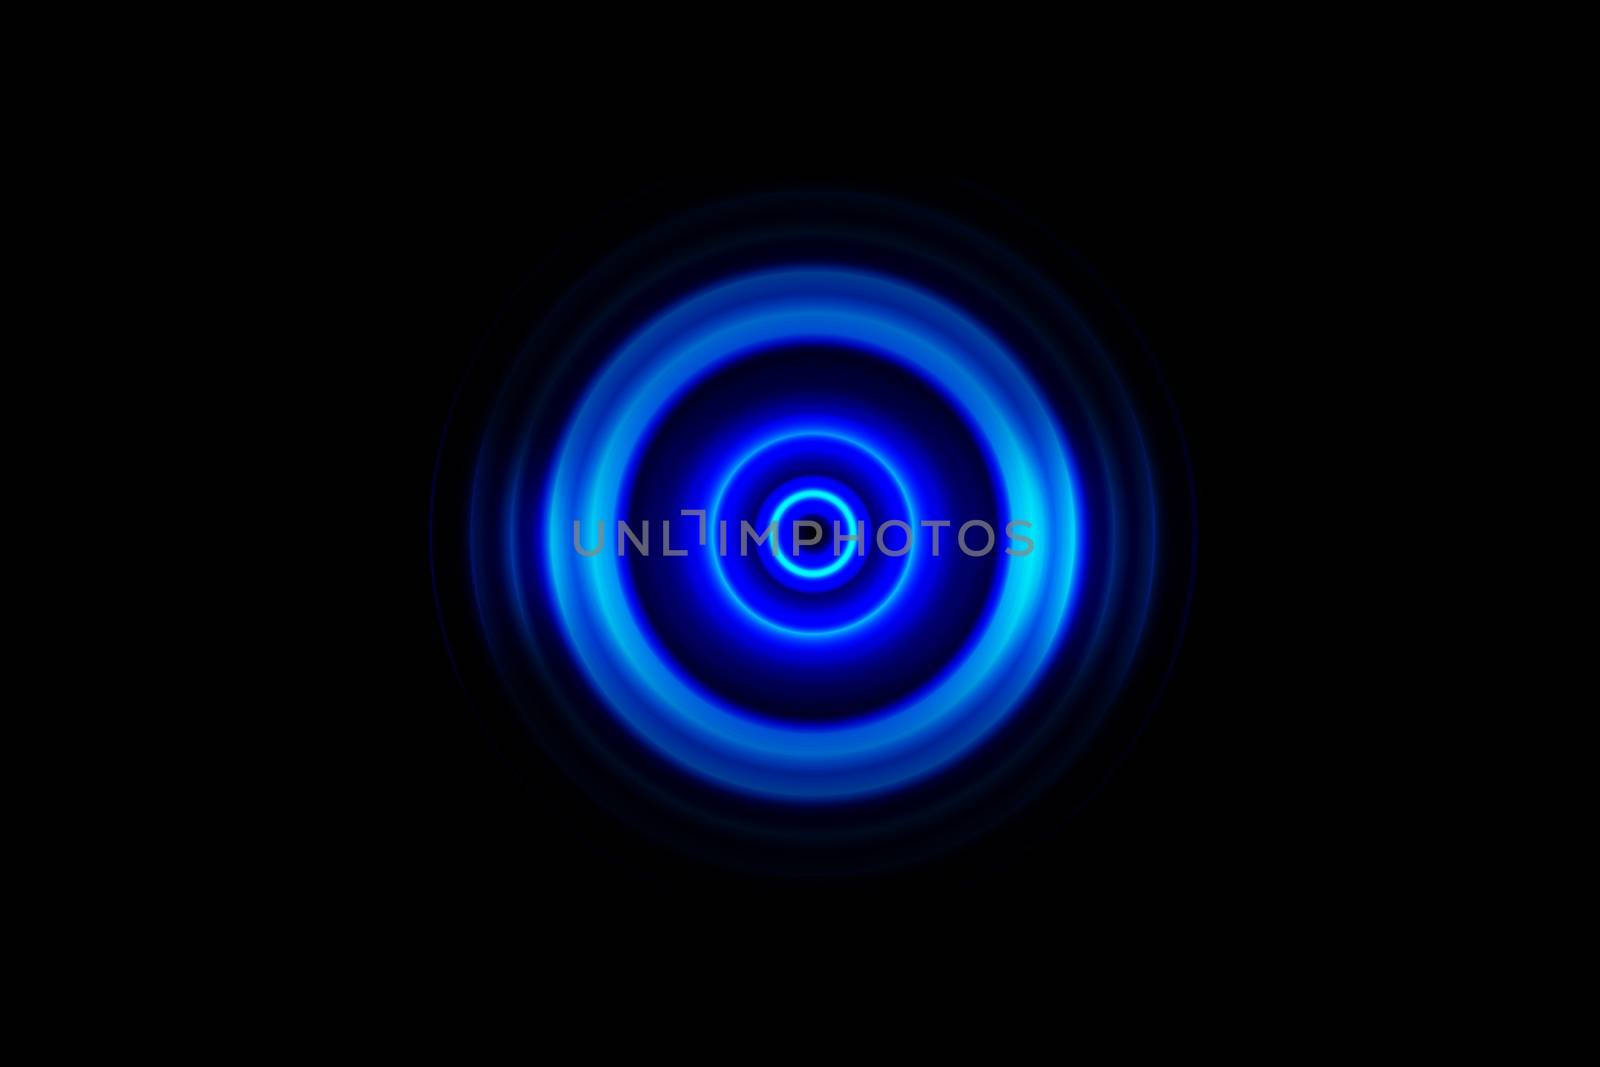 Abstract dark blue ring with sound waves oscillating background by mouu007